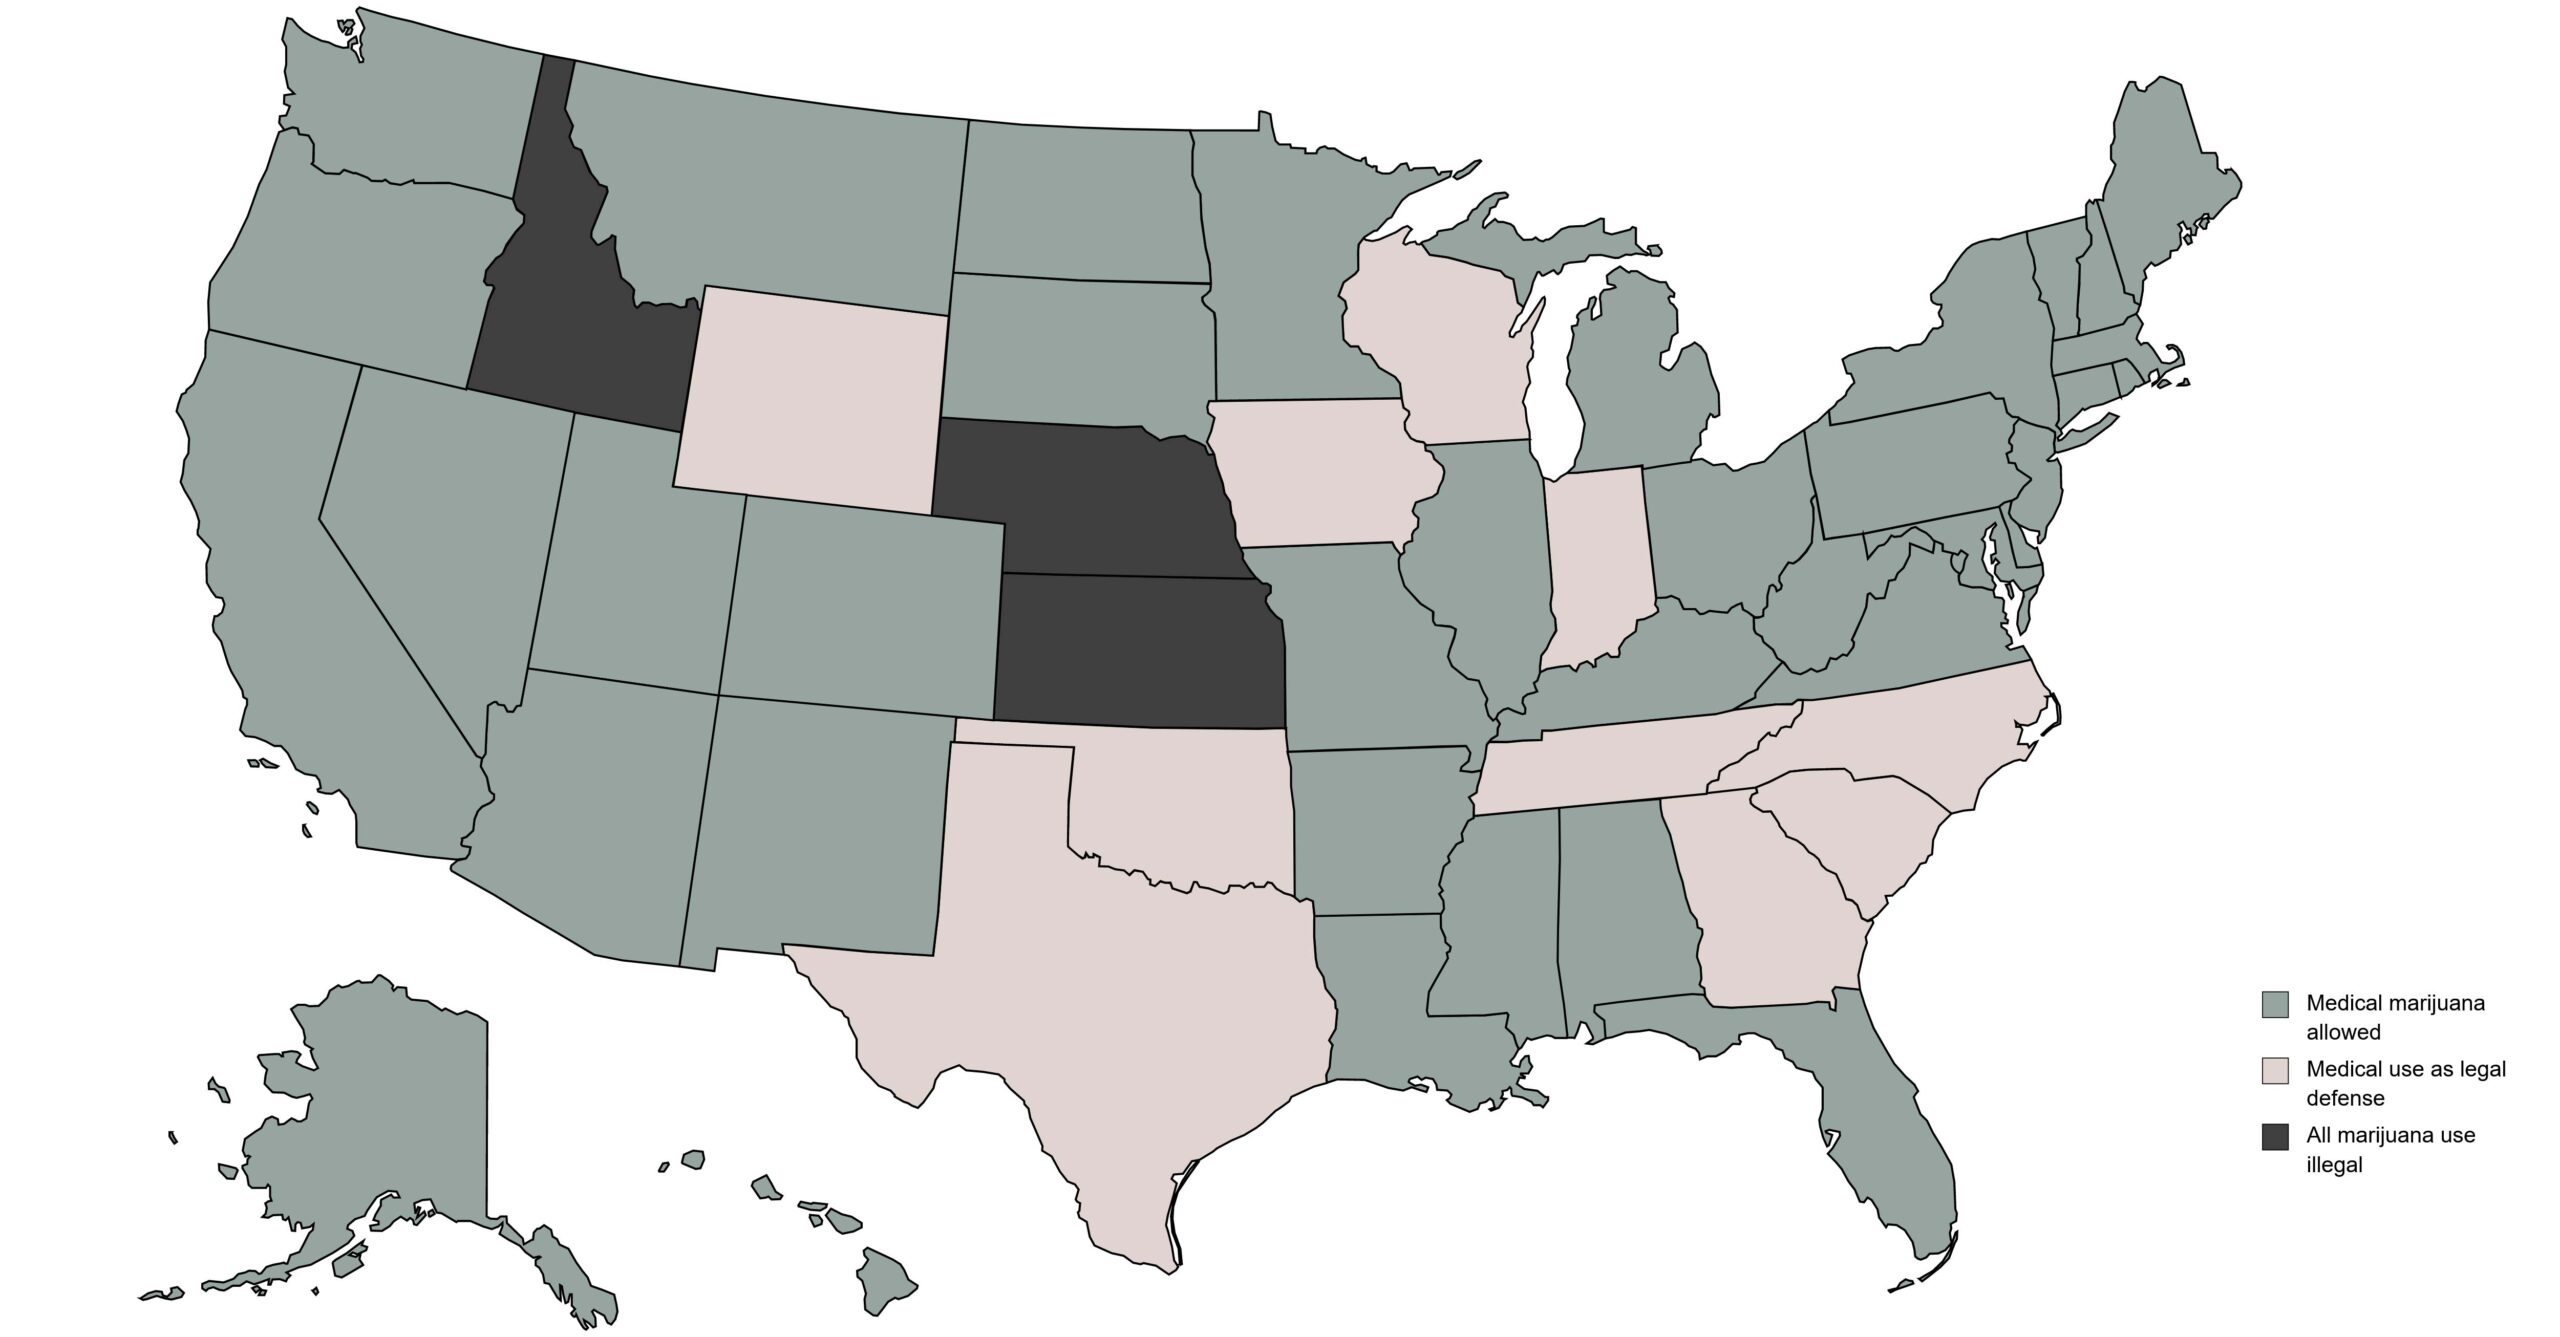 Map of the United States showing which states allow medical marijuana use or allow medical use as a legal defense, and where all marijuana use is illegal.